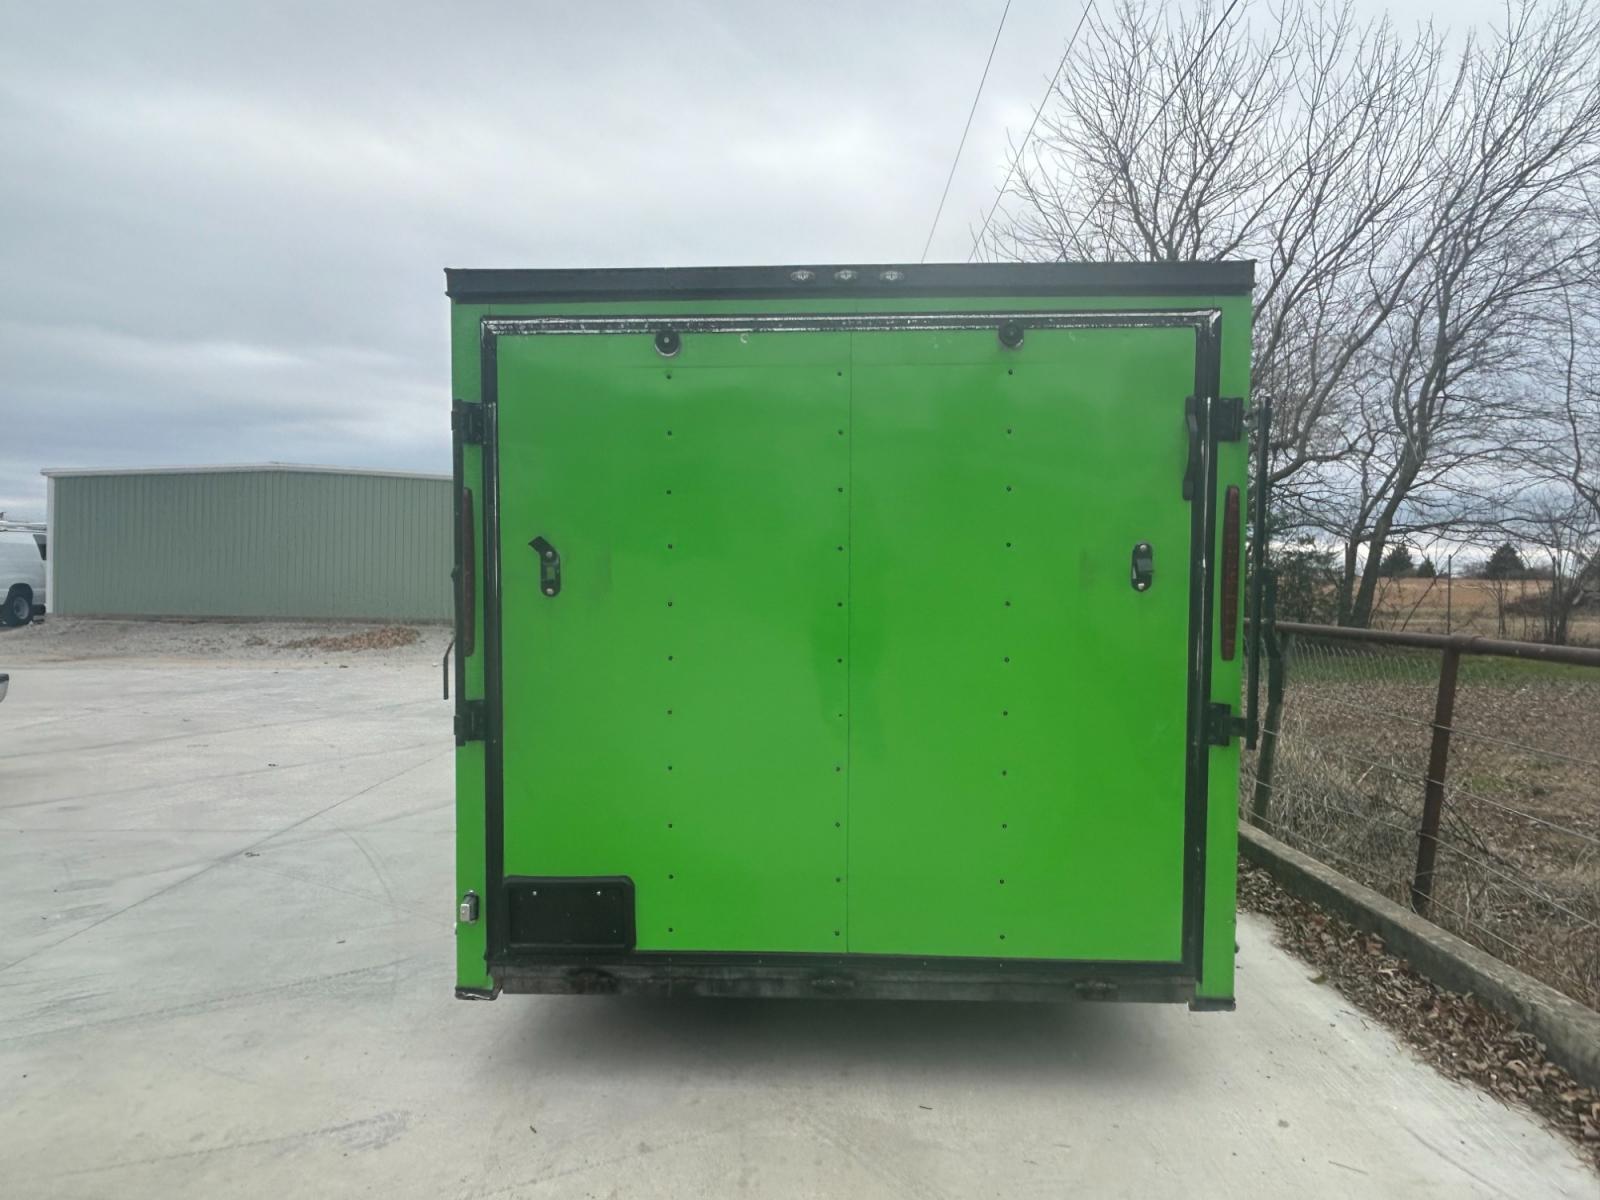 2020 GREEN /TAN DEEP SOUTH ENCLOSED TRAILER (7JKBE1624LH) , located at 17760 Hwy 62, Morris, OK, 74445, 35.609104, -95.877060 - 2020 DEEP SOUTH ENCLOSED TRAILER. THIS TRAILER IS 12 X 6.5 FT. ***MINOR DAMAGES AS SHOWN IN PICTURES*** ***WE RECOMMEND THAT THE TIRES TO BE REPLACED*** WE CAN REPLACE THE TIRES FOR AN ADDITIONAL $400 $5,500 - Photo #2